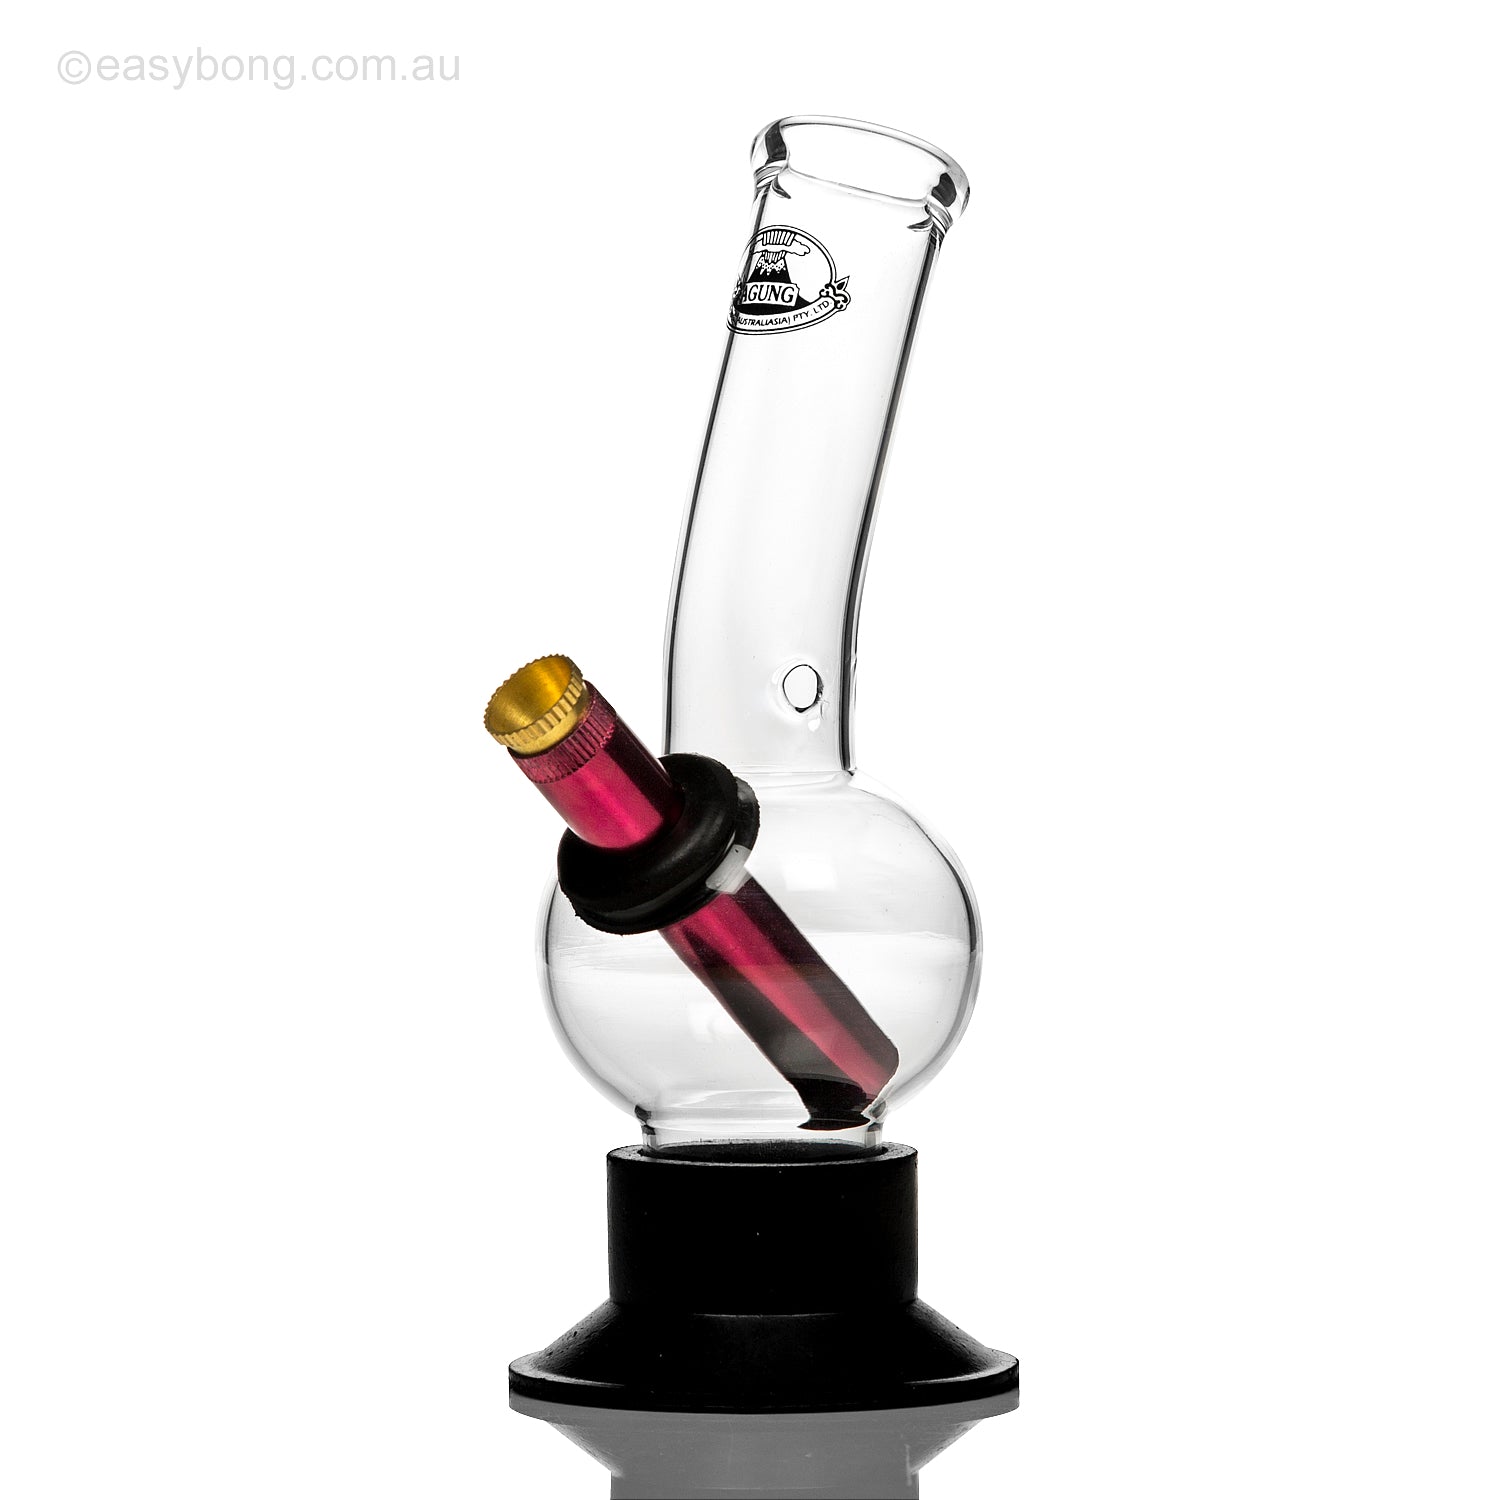 Agung shorty glass bong with rubber base, can be shipped Australia wide